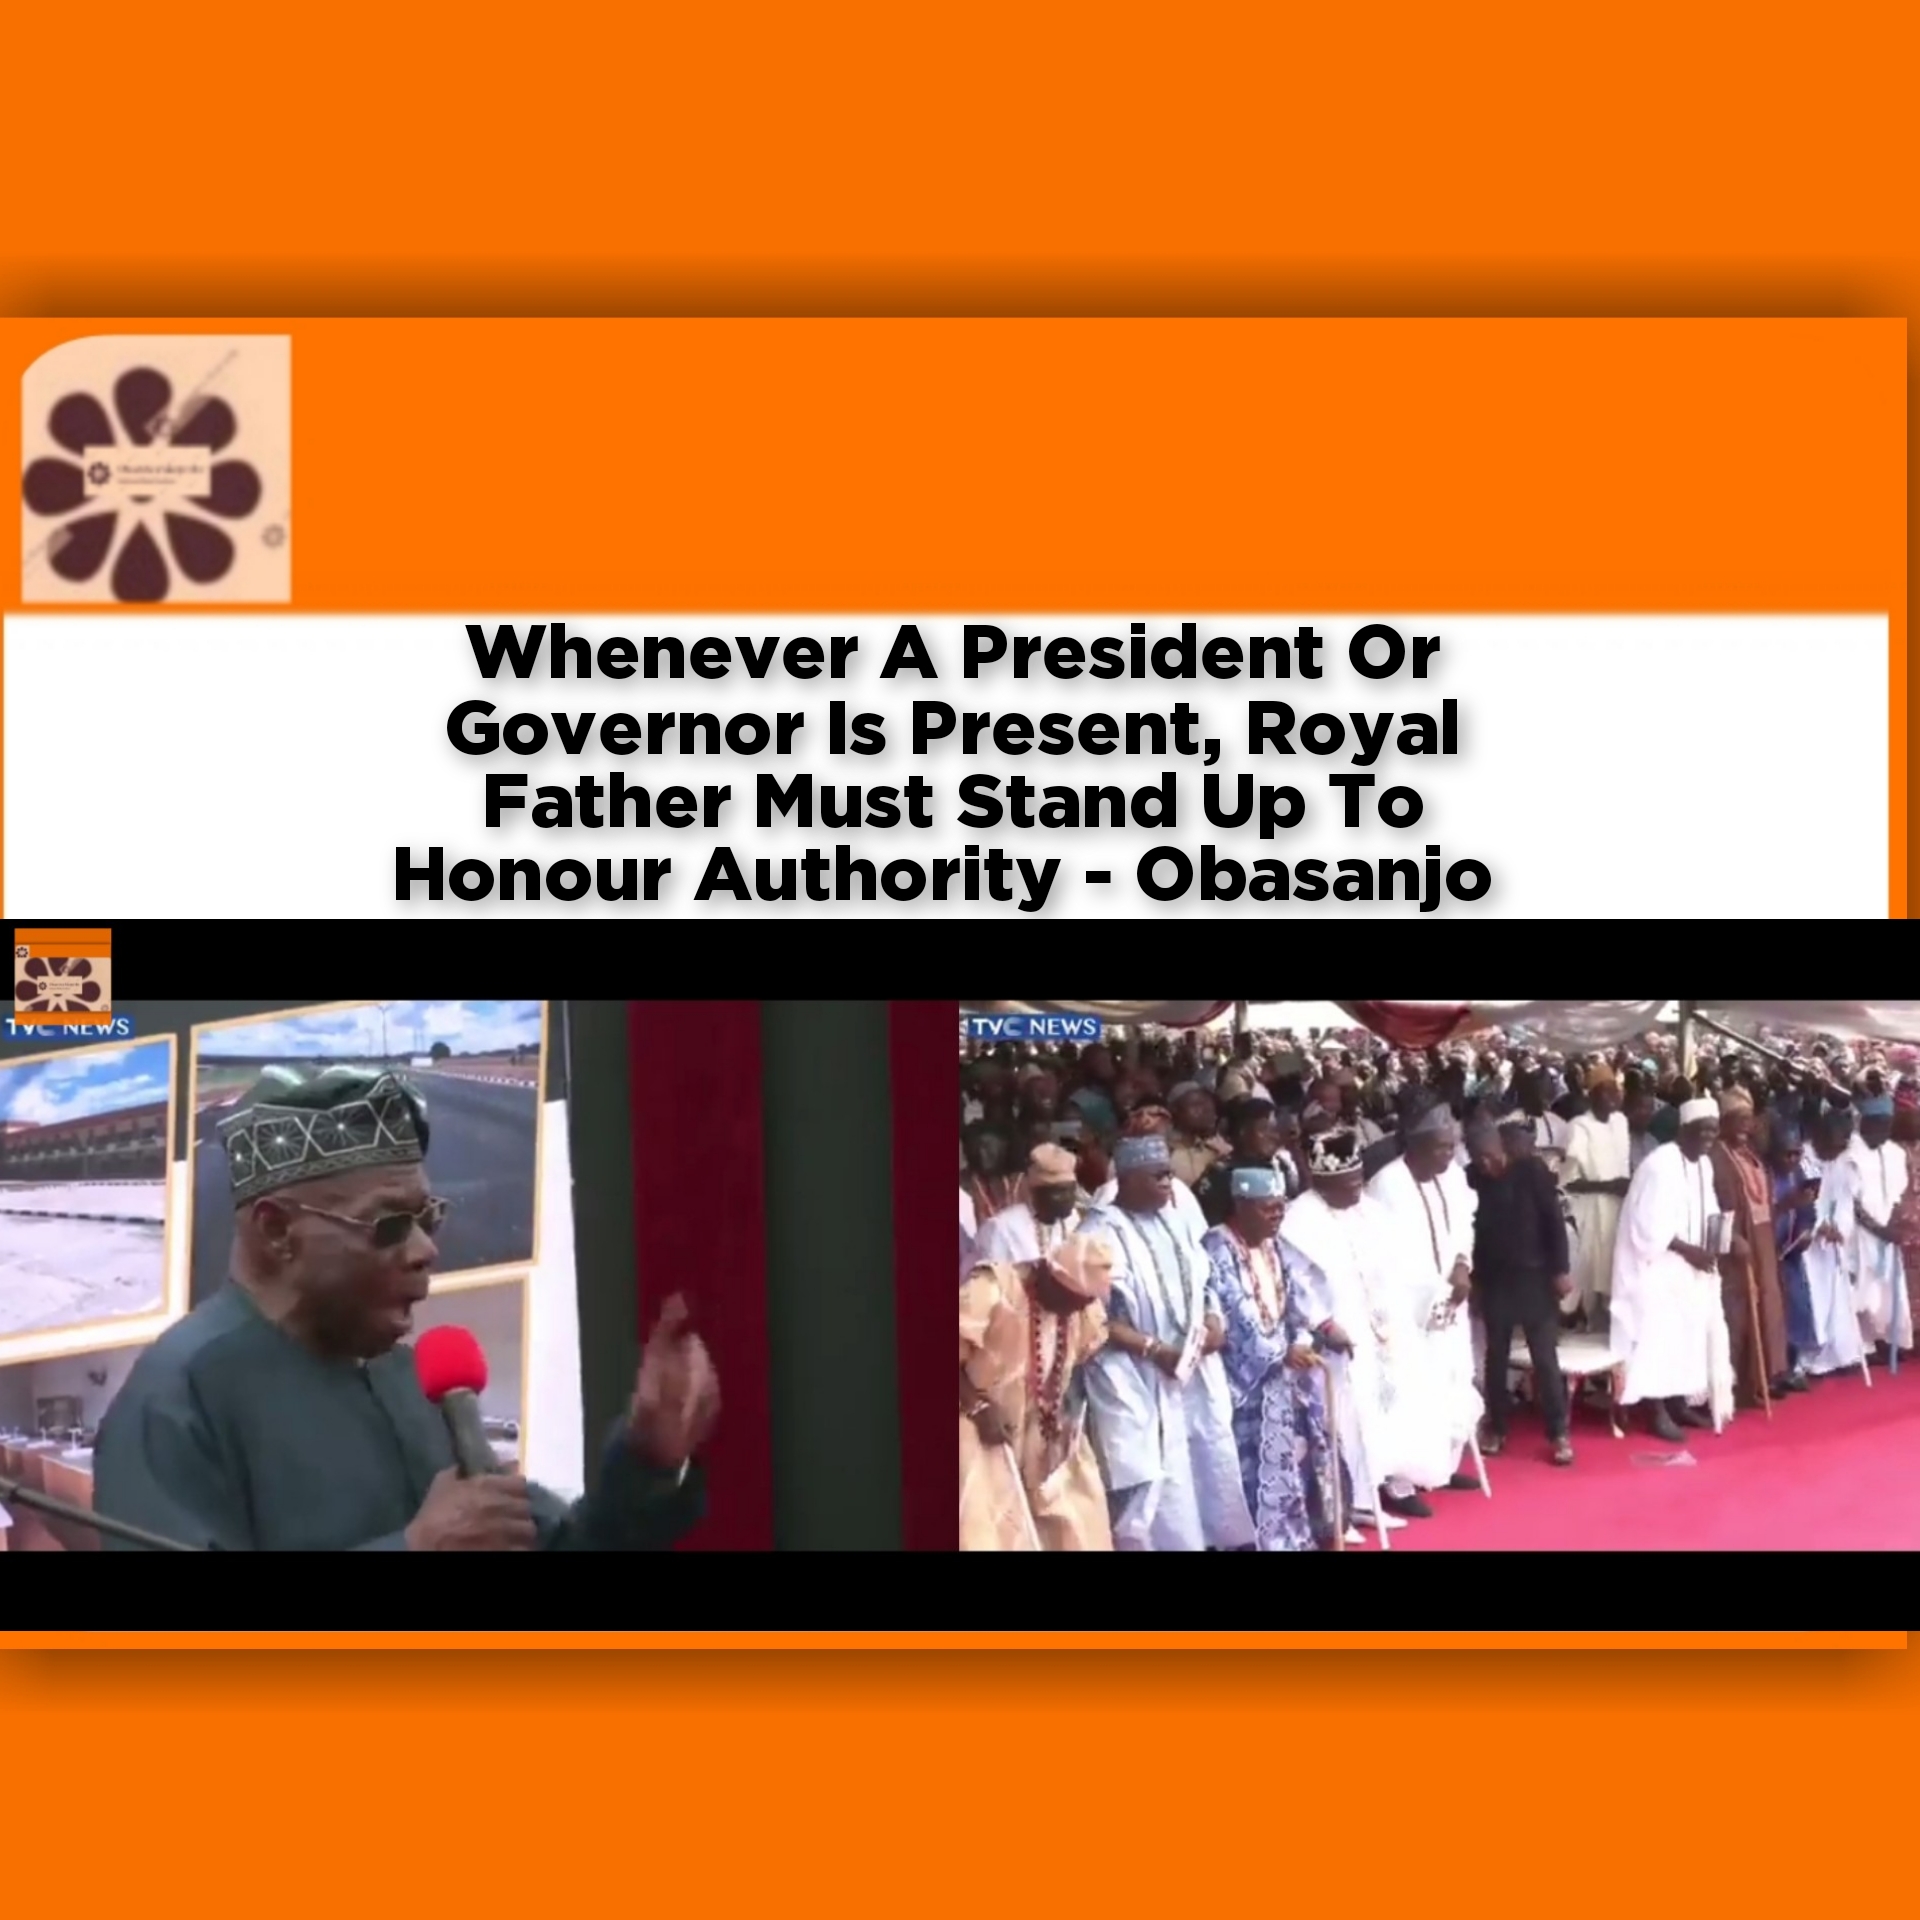 Whenever A President Or Governor Is Present, Royal Father Must Stand Up To Honour Authority - Obasanjo ~ OsazuwaAkonedo #Unknown